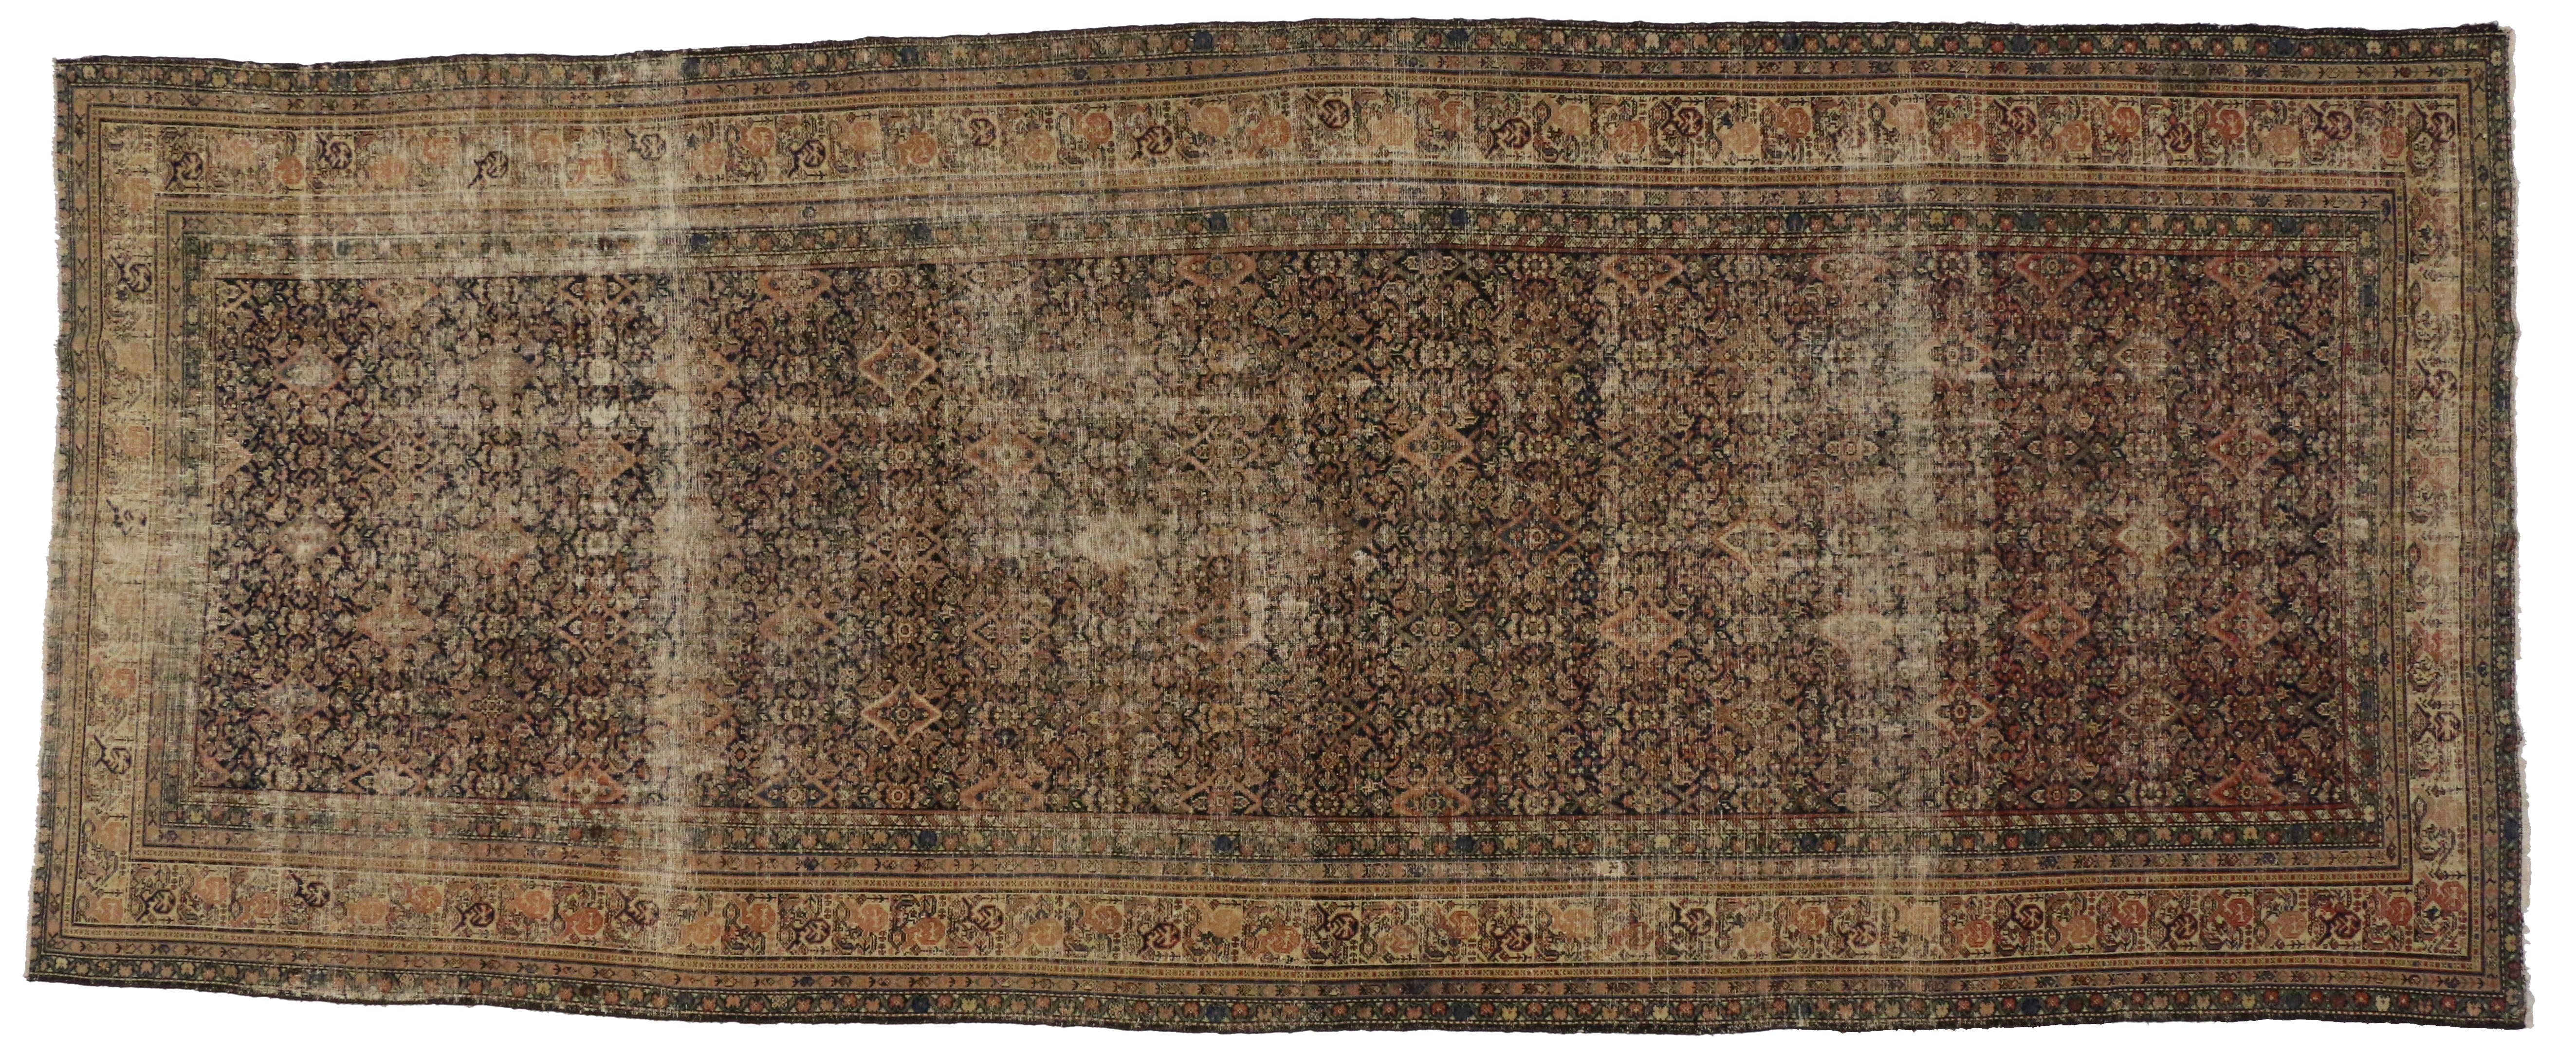 Distressed Antique Persian Malayer Gallery Rug, Long Living Room Rug In Distressed Condition For Sale In Dallas, TX